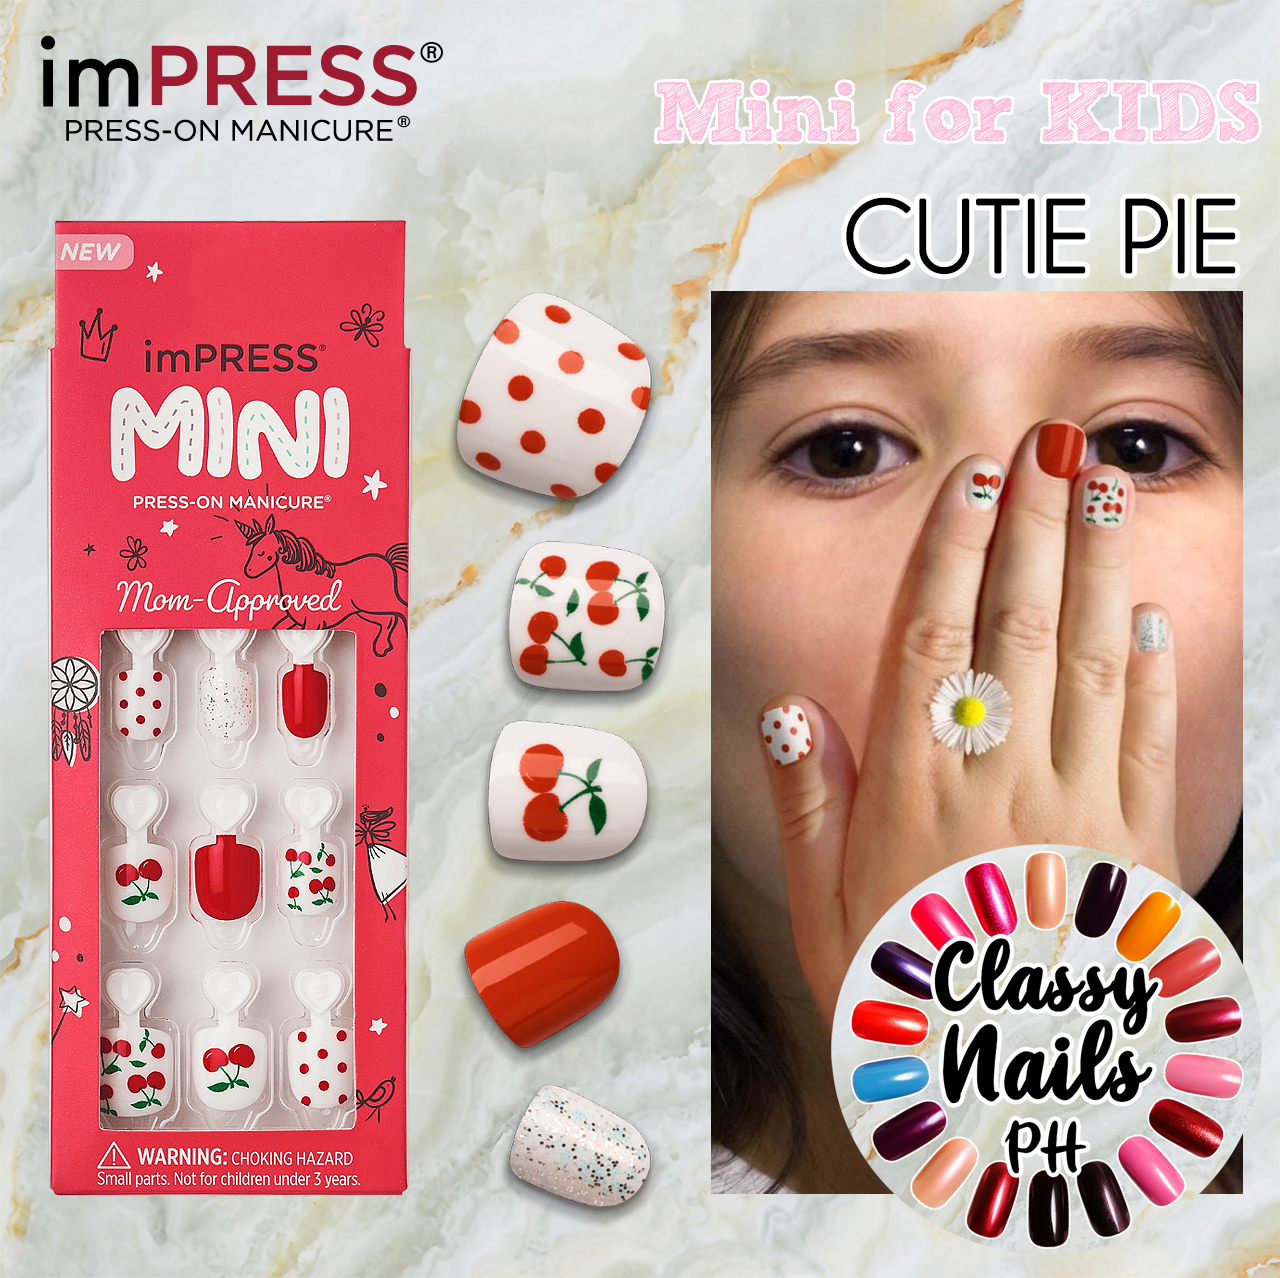 FOR KIDS • ImPress MINI • Press On Nails • Manicure • Branded High Quality  Artificial Faux Nails • Classy Nails Ph | Lazada PH